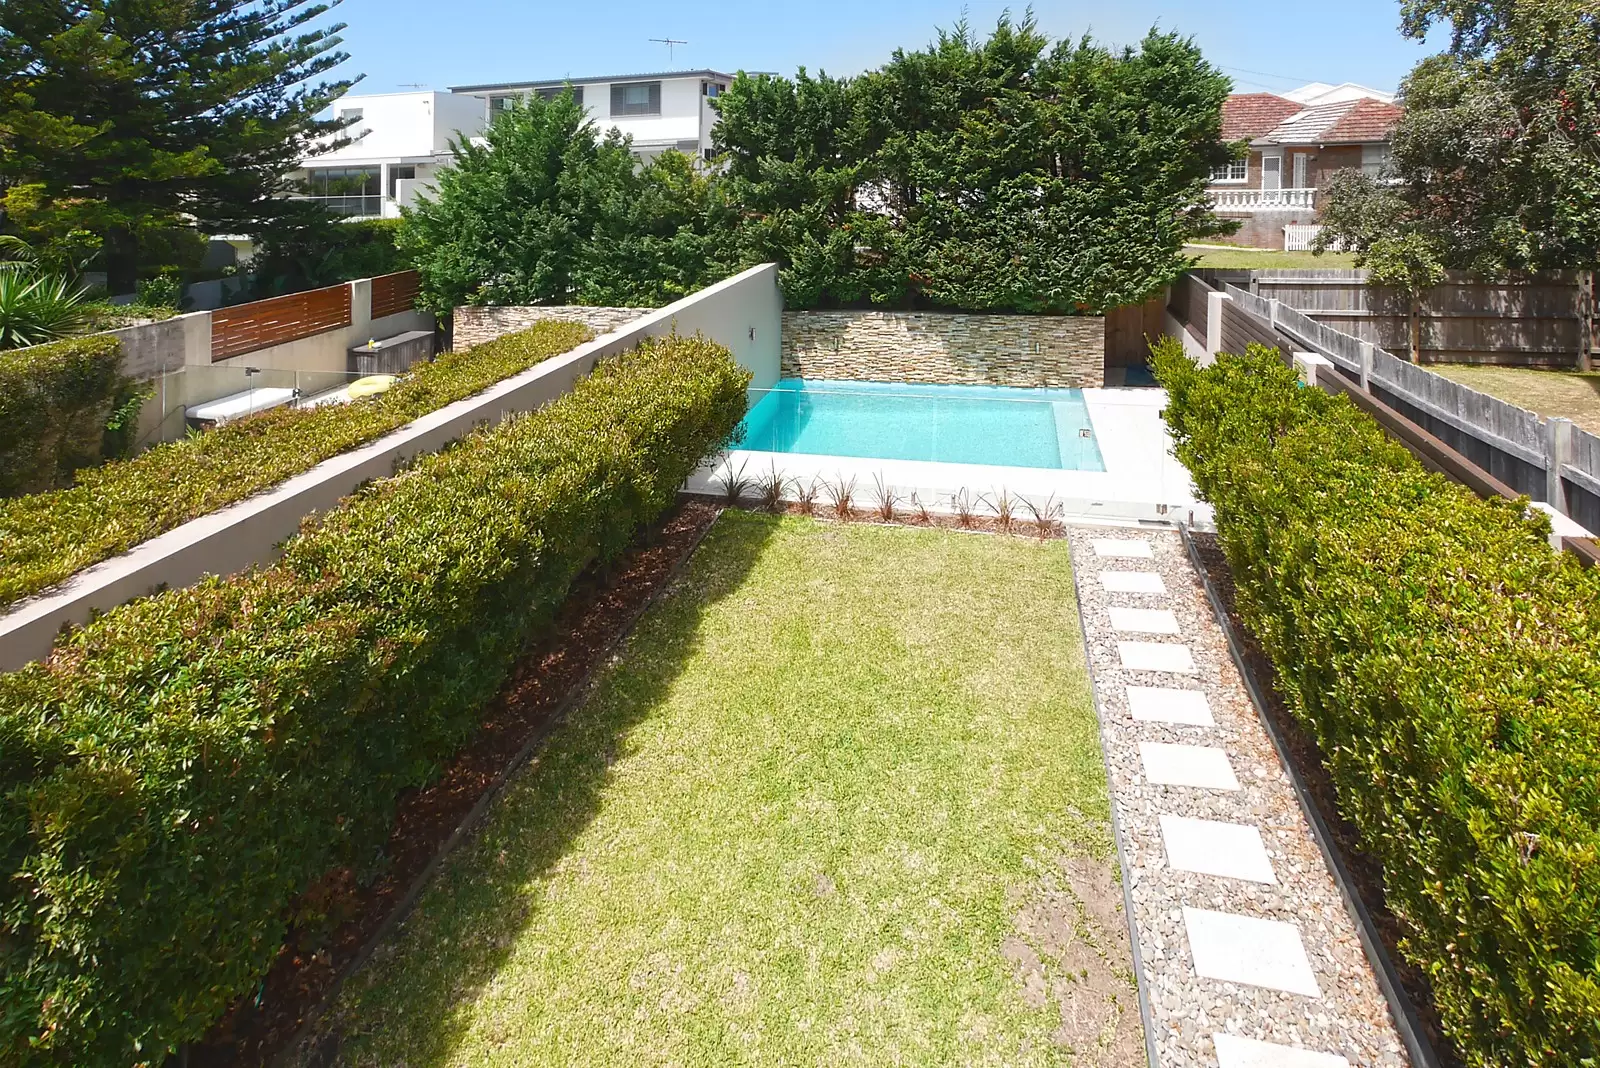 Photo #15: 18a Napier Street, Dover Heights - Sold by Sydney Sotheby's International Realty